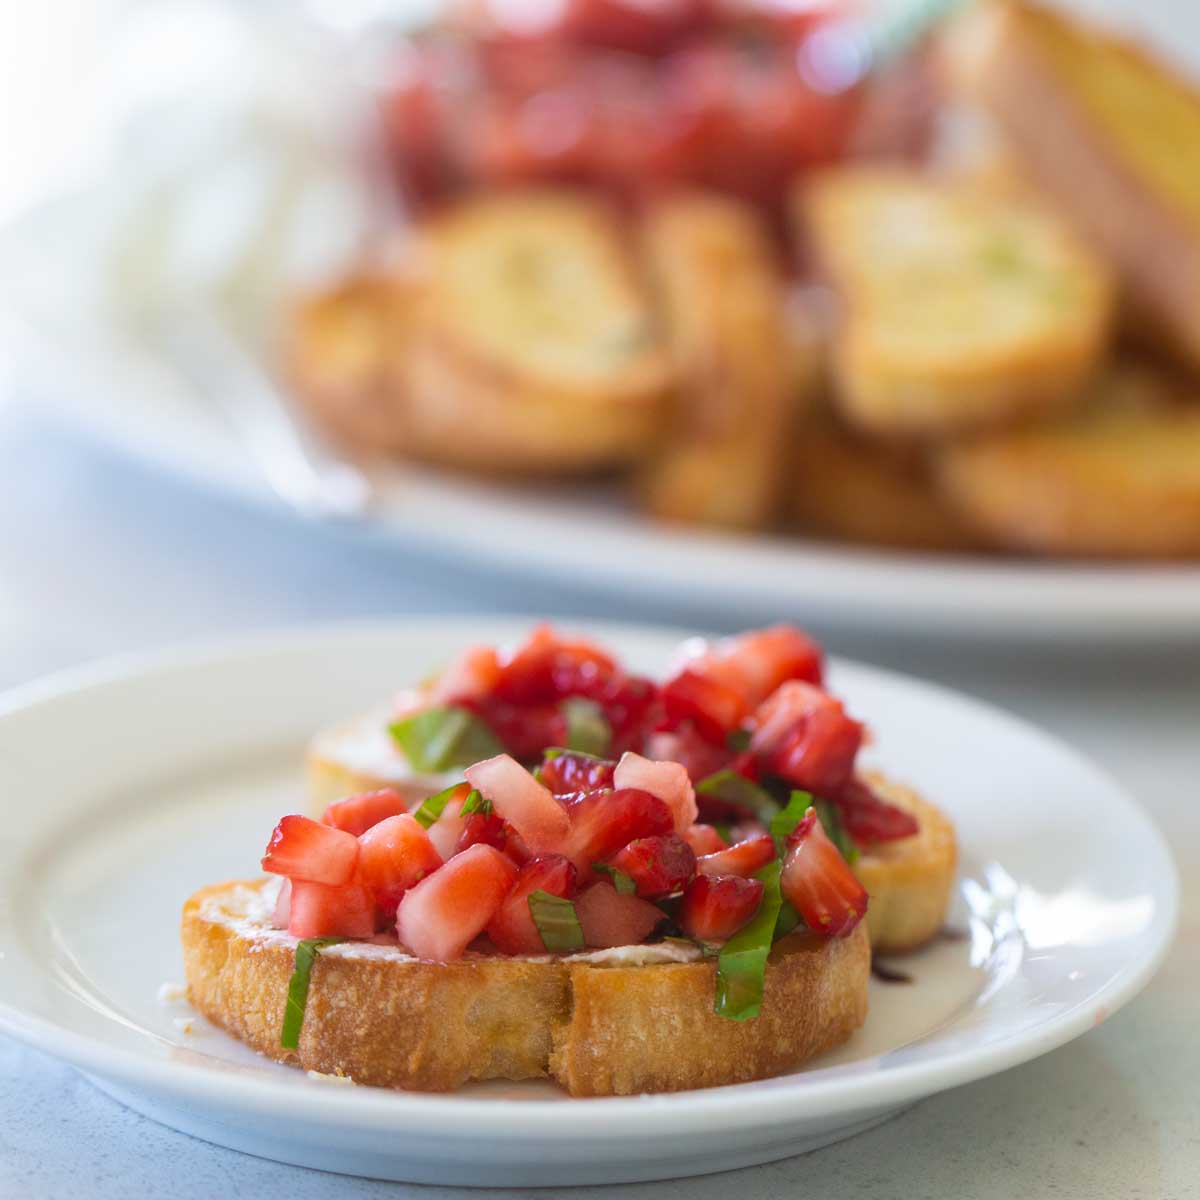 2 crostini toasts are topped with diced strawberries and a sprinkle of fresh basil to show the strawberry bruschetta appetizer. A plate of crostini sits in the background.